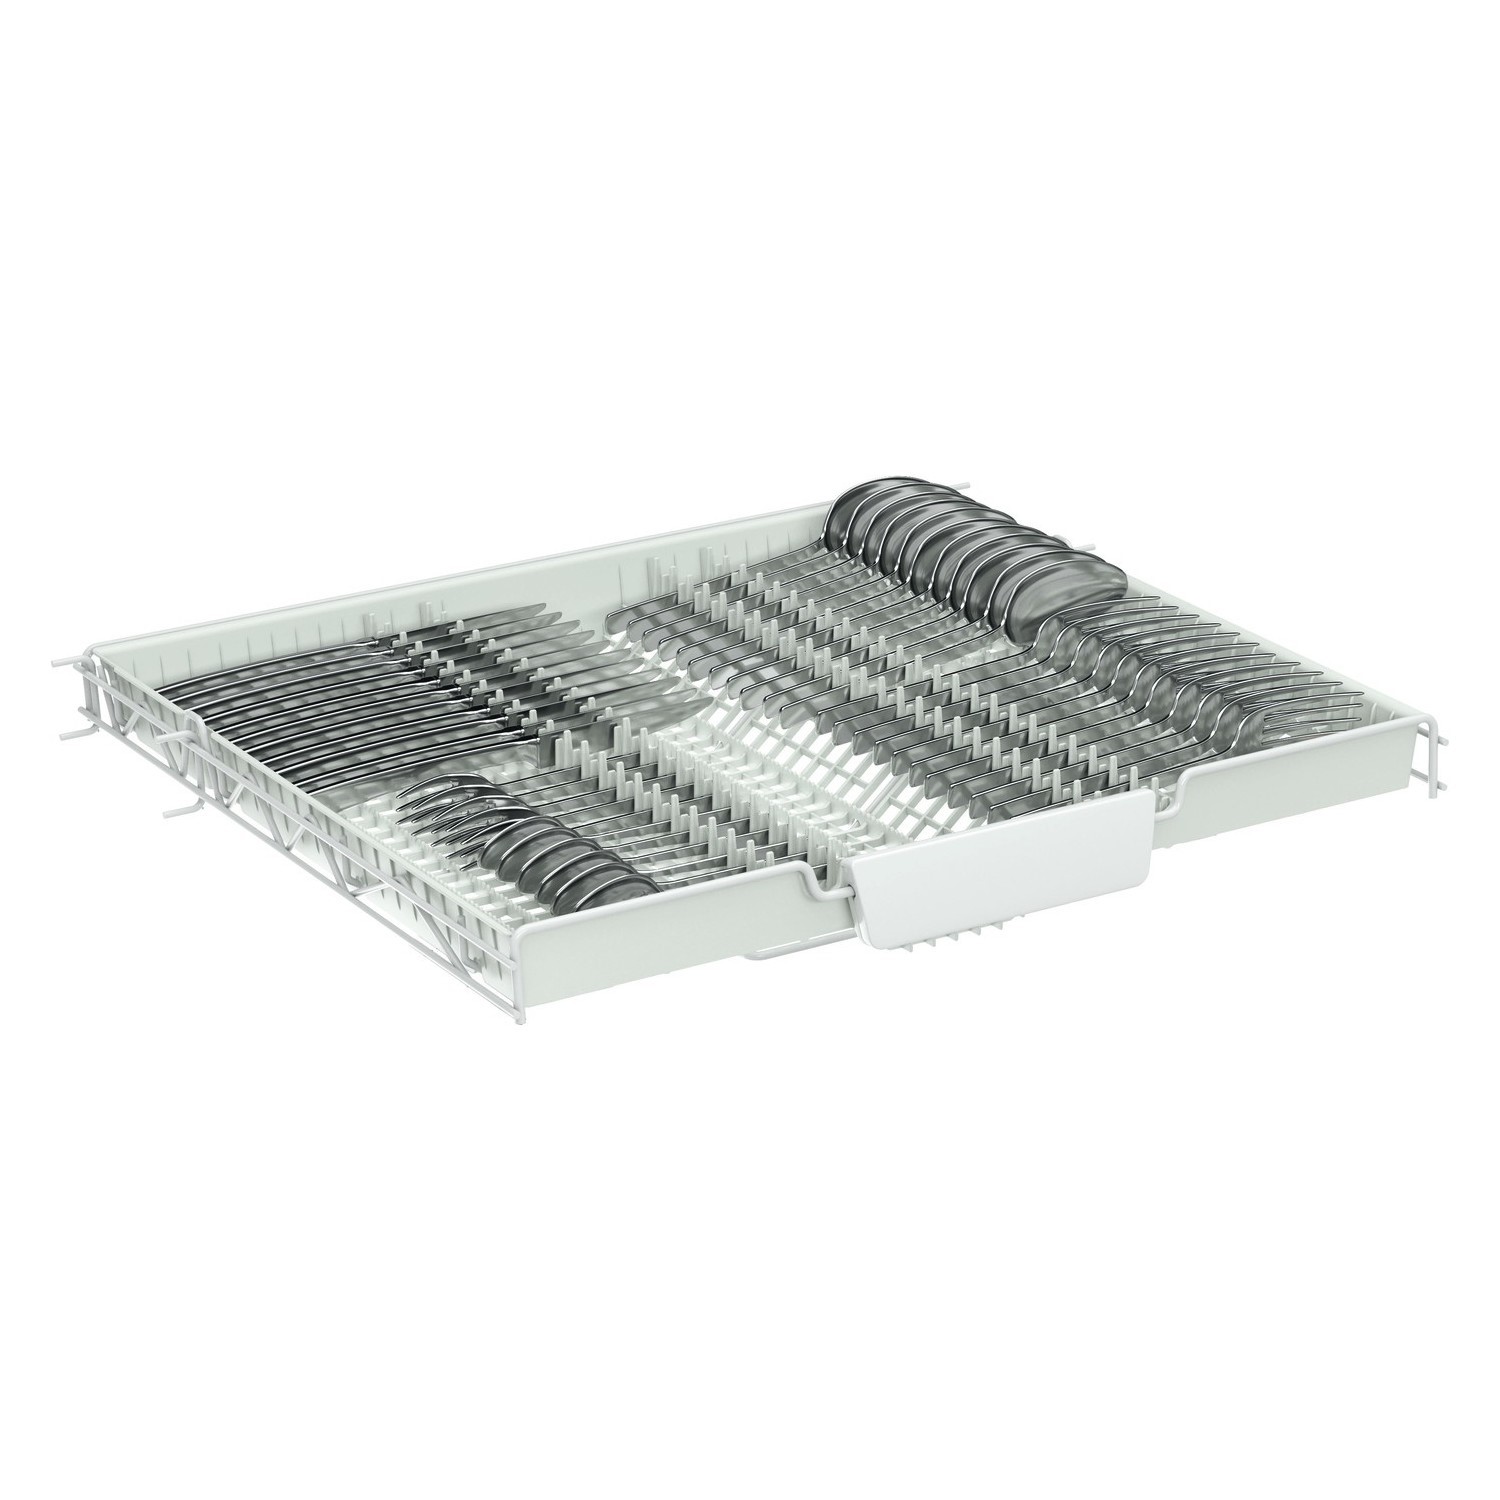 miele fully integrated dishwasher with cutlery tray